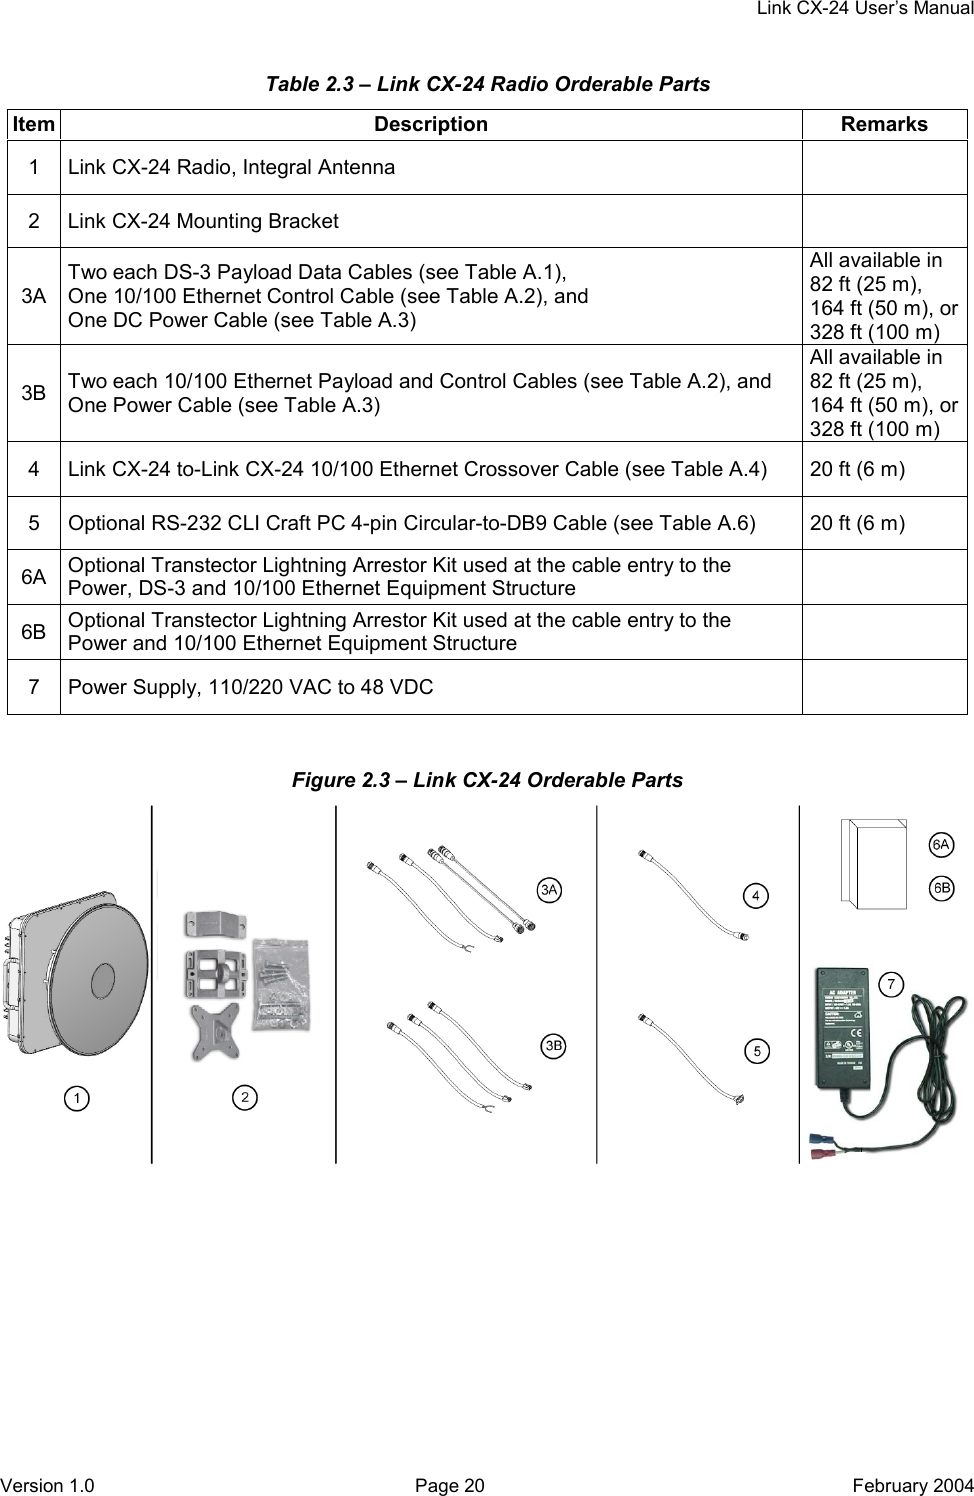     Link CX-24 User’s Manual Version 1.0  Page 20  February 2004 Table 2.3 – Link CX-24 Radio Orderable Parts Item Description  Remarks 1  Link CX-24 Radio, Integral Antenna   2  Link CX-24 Mounting Bracket   3A Two each DS-3 Payload Data Cables (see Table A.1), One 10/100 Ethernet Control Cable (see Table A.2), and One DC Power Cable (see Table A.3) All available in 82 ft (25 m), 164 ft (50 m), or328 ft (100 m) 3B  Two each 10/100 Ethernet Payload and Control Cables (see Table A.2), and One Power Cable (see Table A.3) All available in 82 ft (25 m), 164 ft (50 m), or328 ft (100 m) 4  Link CX-24 to-Link CX-24 10/100 Ethernet Crossover Cable (see Table A.4)  20 ft (6 m) 5  Optional RS-232 CLI Craft PC 4-pin Circular-to-DB9 Cable (see Table A.6)  20 ft (6 m) 6A  Optional Transtector Lightning Arrestor Kit used at the cable entry to the Power, DS-3 and 10/100 Ethernet Equipment Structure   6B  Optional Transtector Lightning Arrestor Kit used at the cable entry to the Power and 10/100 Ethernet Equipment Structure   7  Power Supply, 110/220 VAC to 48 VDC    Figure 2.3 – Link CX-24 Orderable Parts   